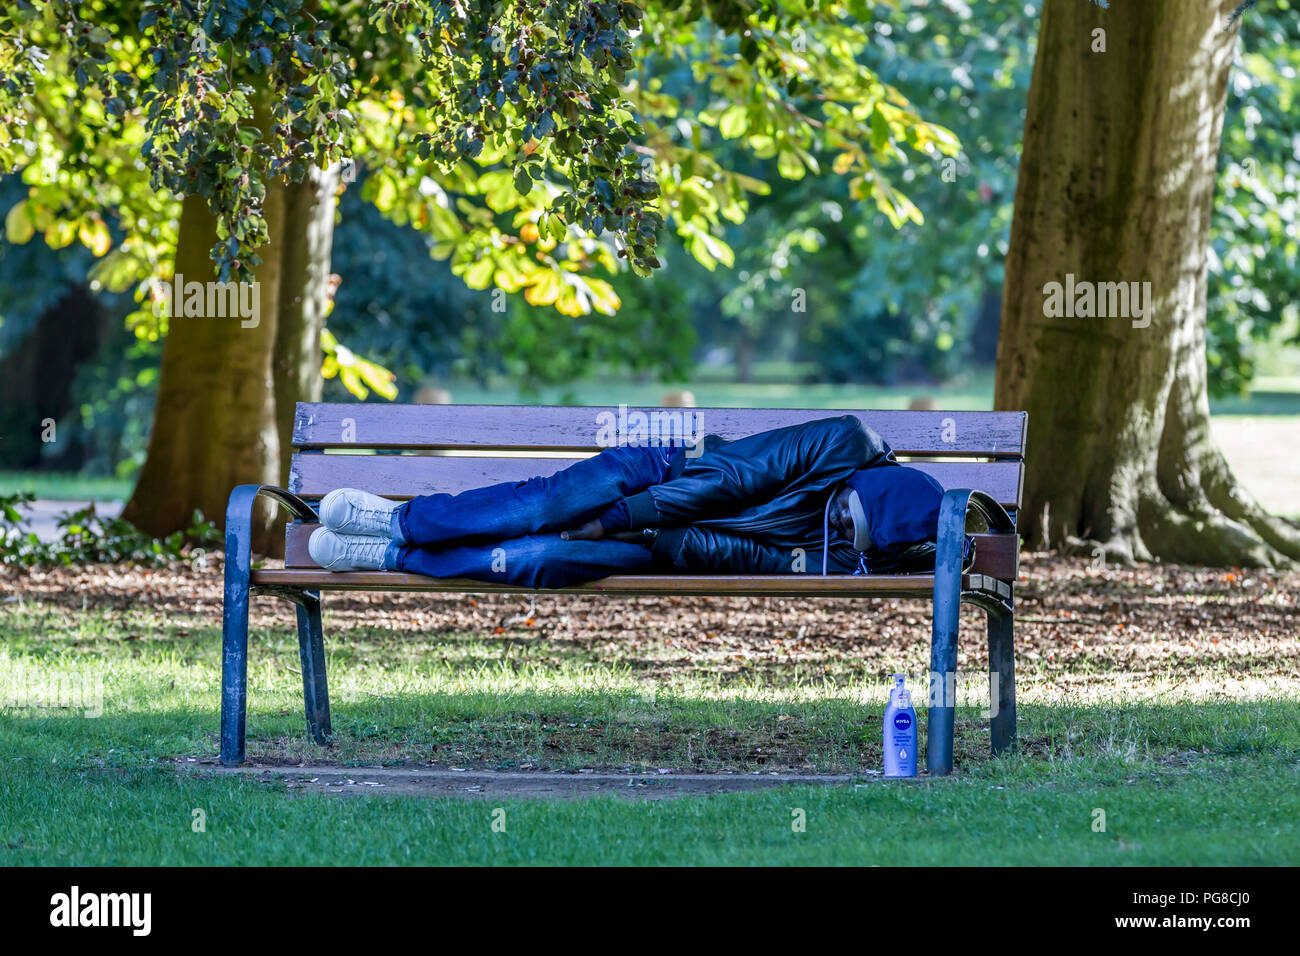 Northampton. U.K. 24th August 2018.  A man sleeping it off or sleeping rough on a park bench in Abington Park this morning, homeless people use the benches and bus shelters around the town park, temperatures were in single figures last night making it feel much colder than of late. Credit: Keith J Smith./Alamy Live News Stock Photo